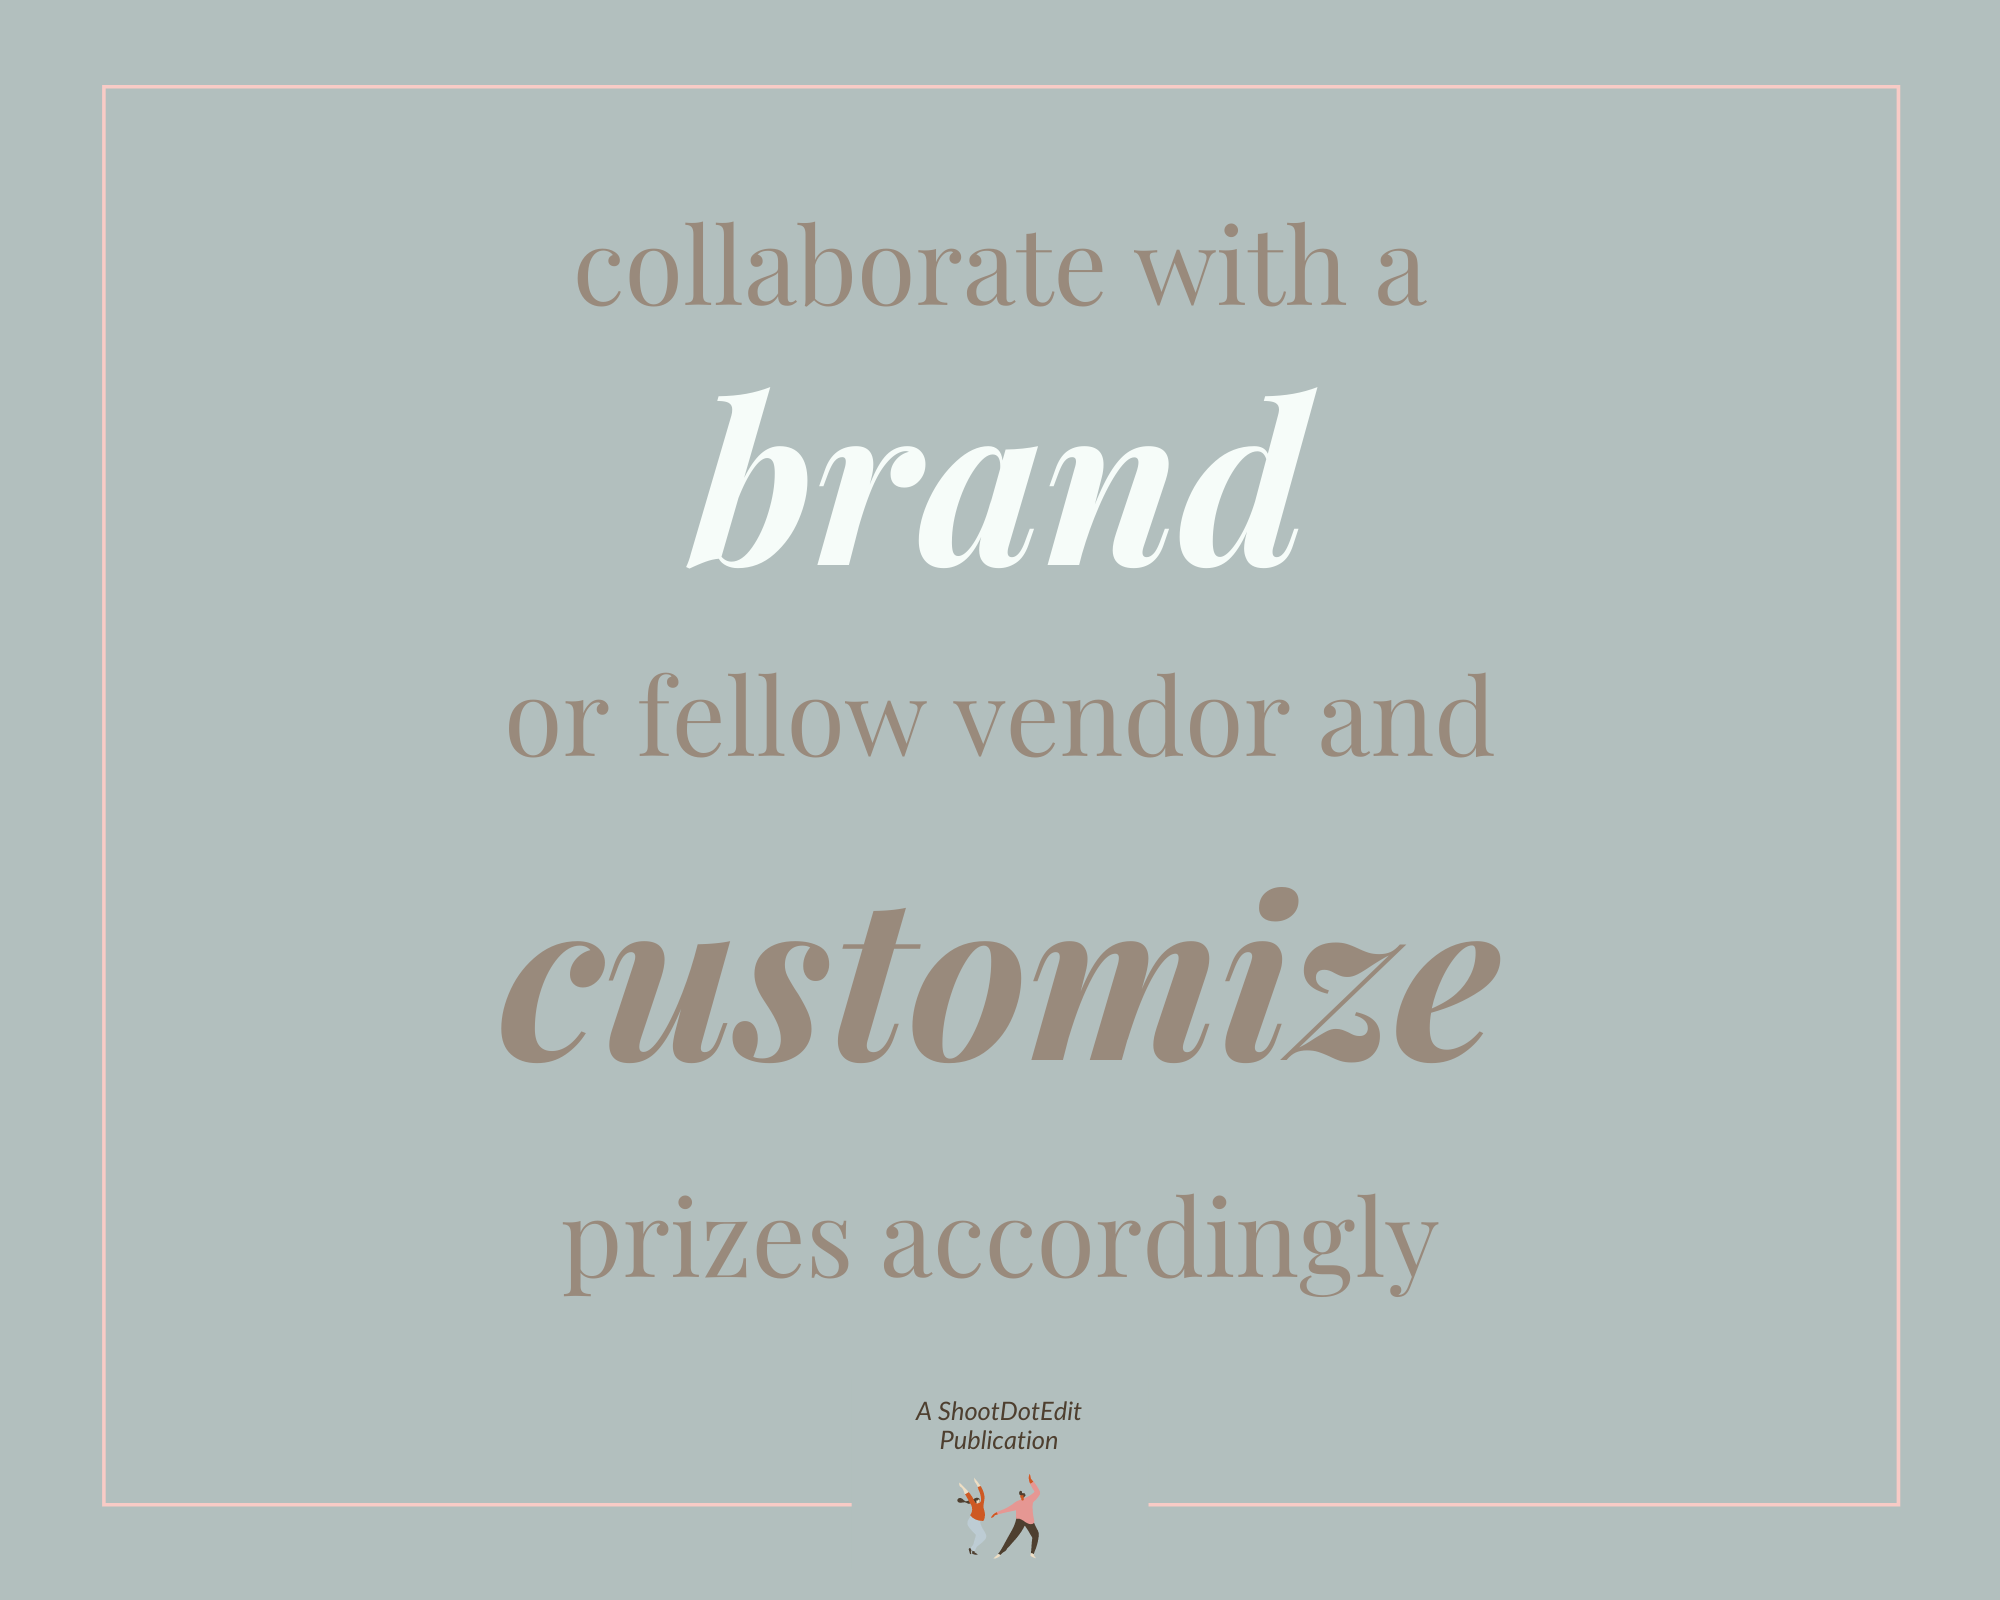 Infographic stating collaborate with a brand or fellow vendor and customize prizes accordingly